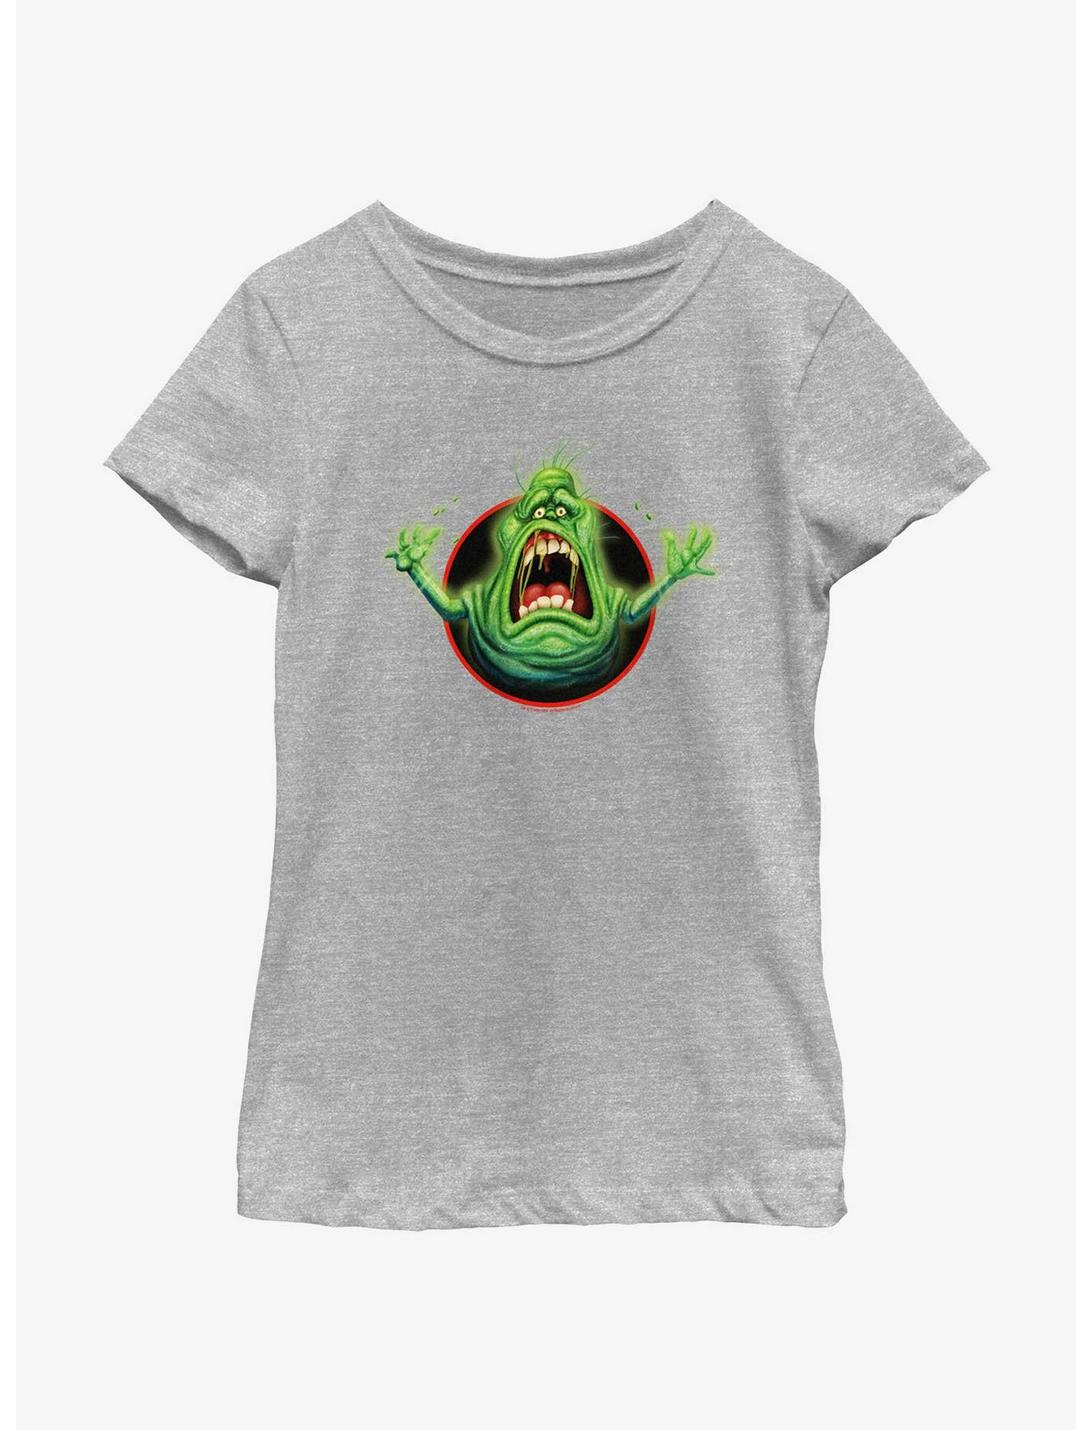 Ghostbusters: Frozen Empire Panic Slimer Girls Youth T-Shirt, ATH HTR, hi-res